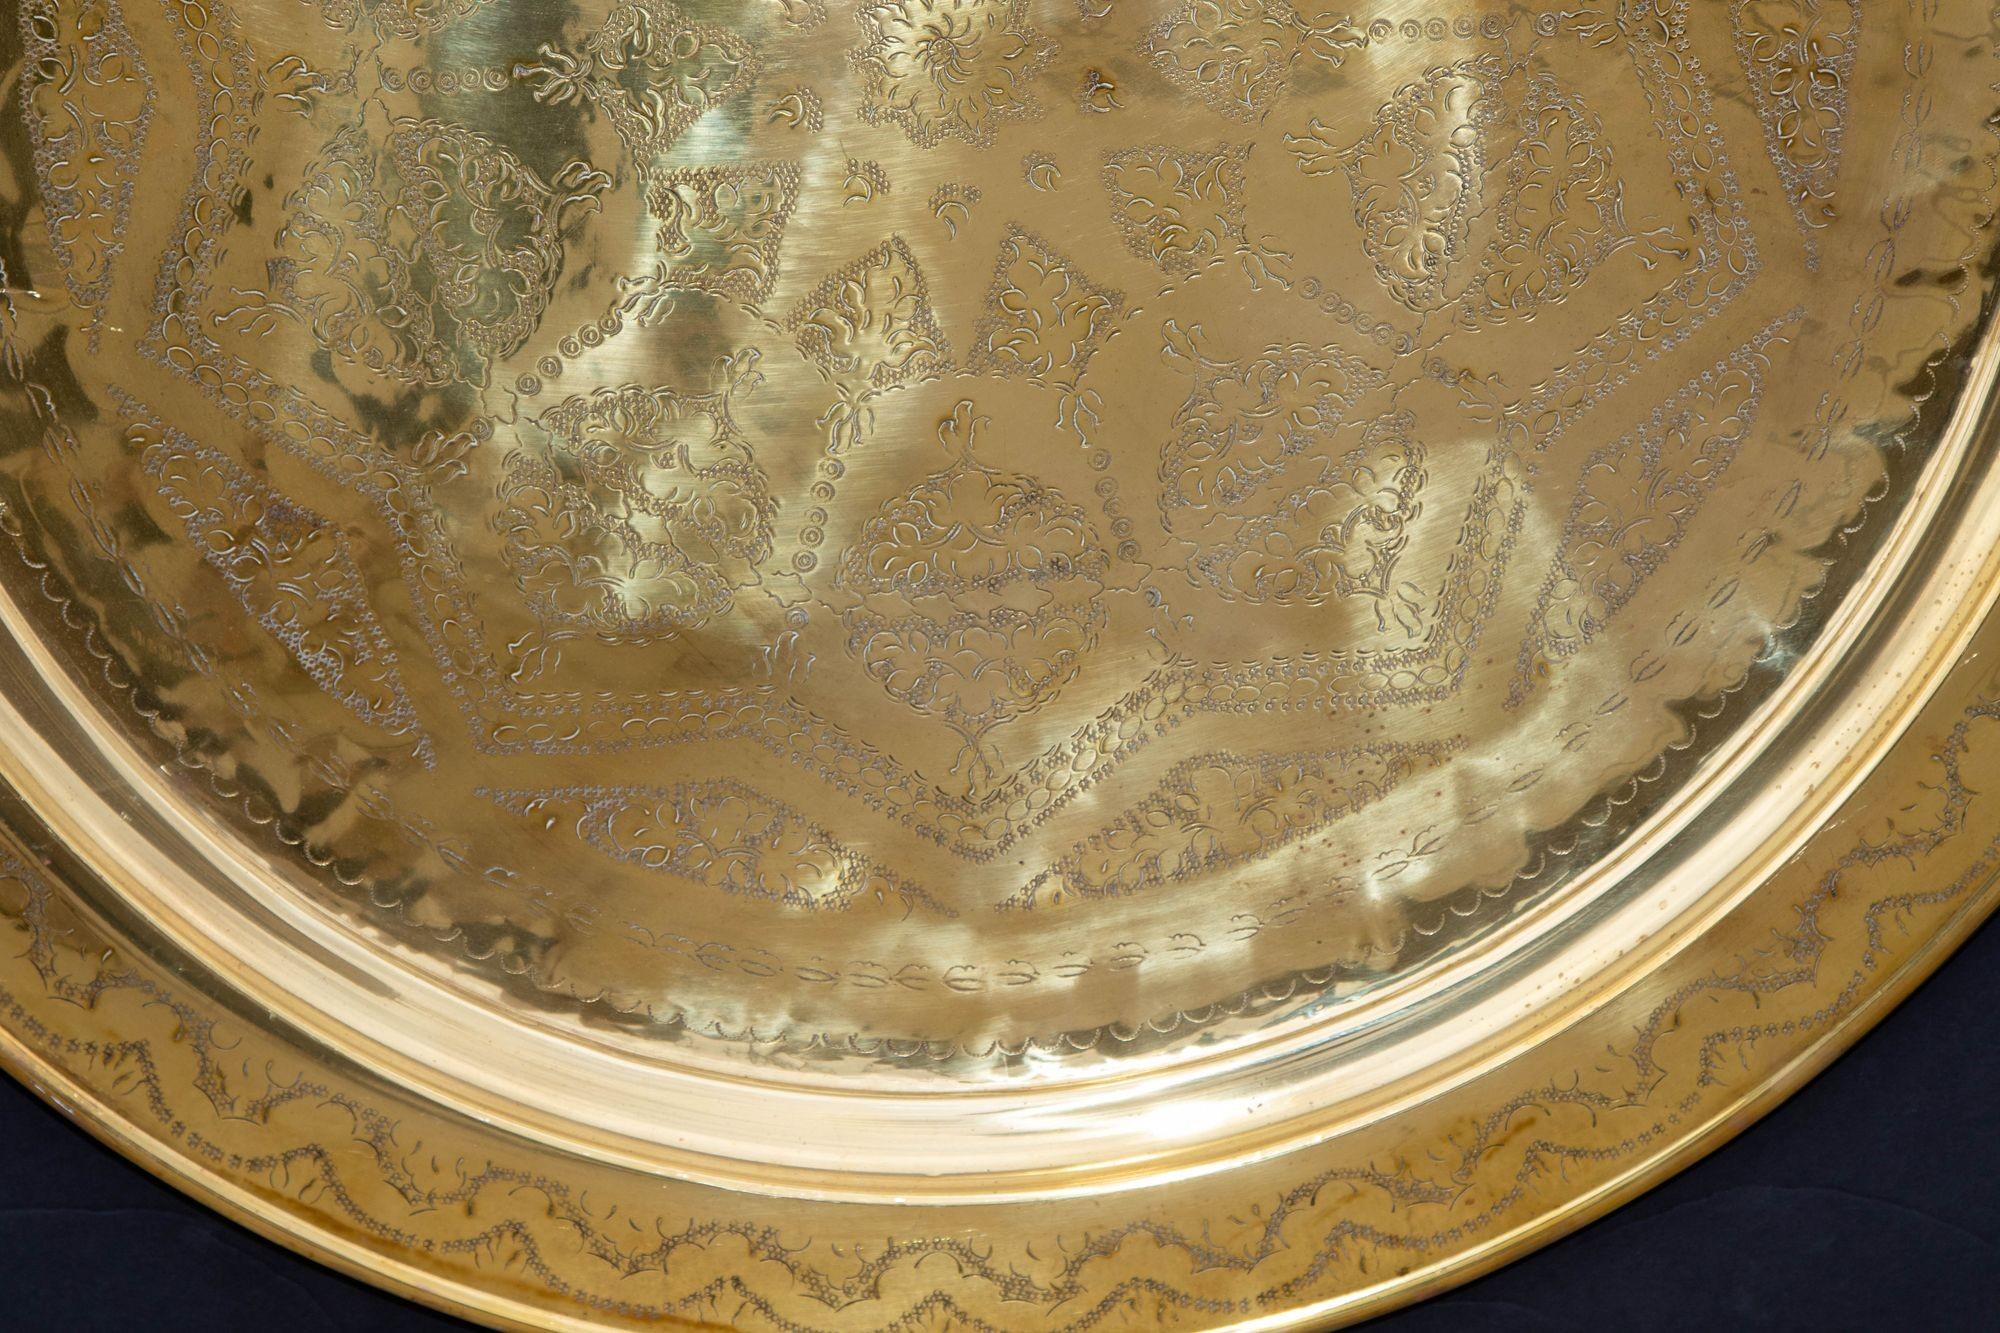 Antique Oversized Round Moroccan Polished Brass Tray Platter 19th C. In Good Condition For Sale In North Hollywood, CA